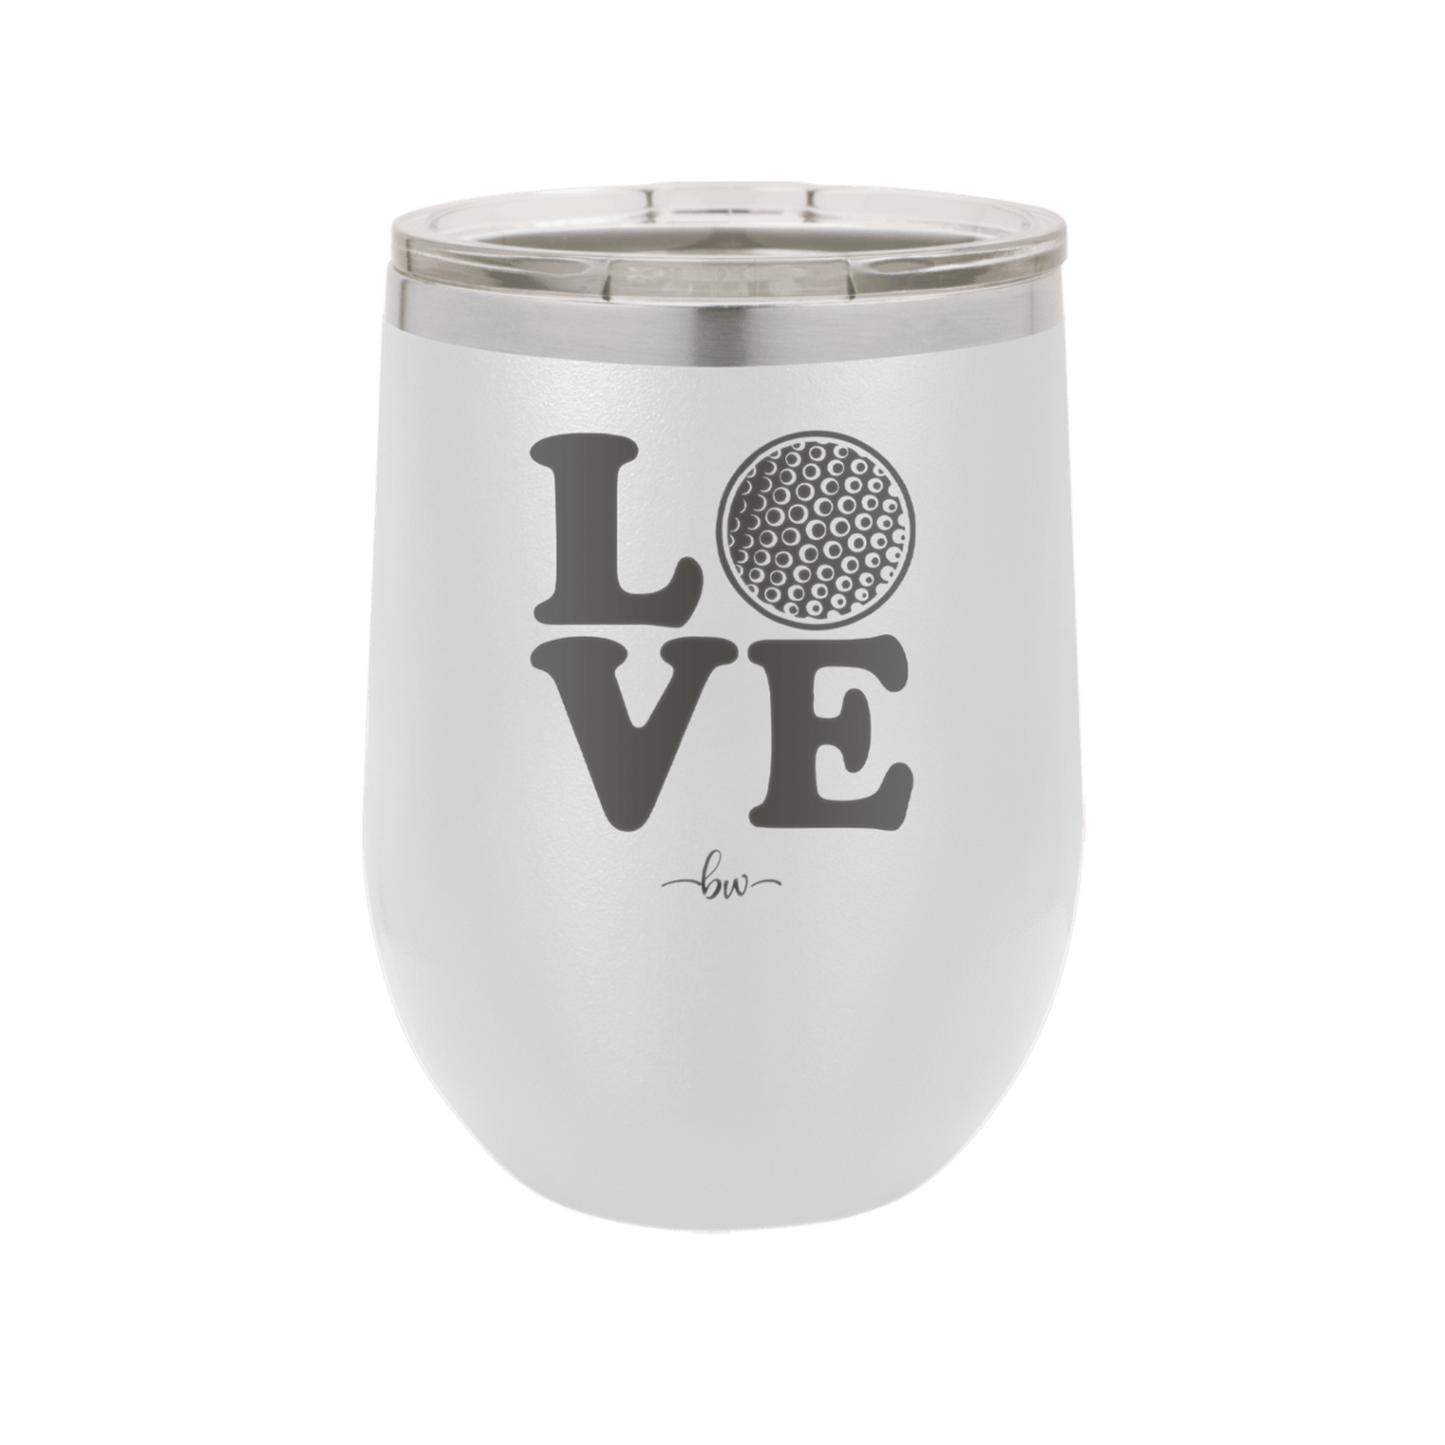 LOVE with Golf Ball - Laser Engraved Stainless Steel Drinkware - 1671 -